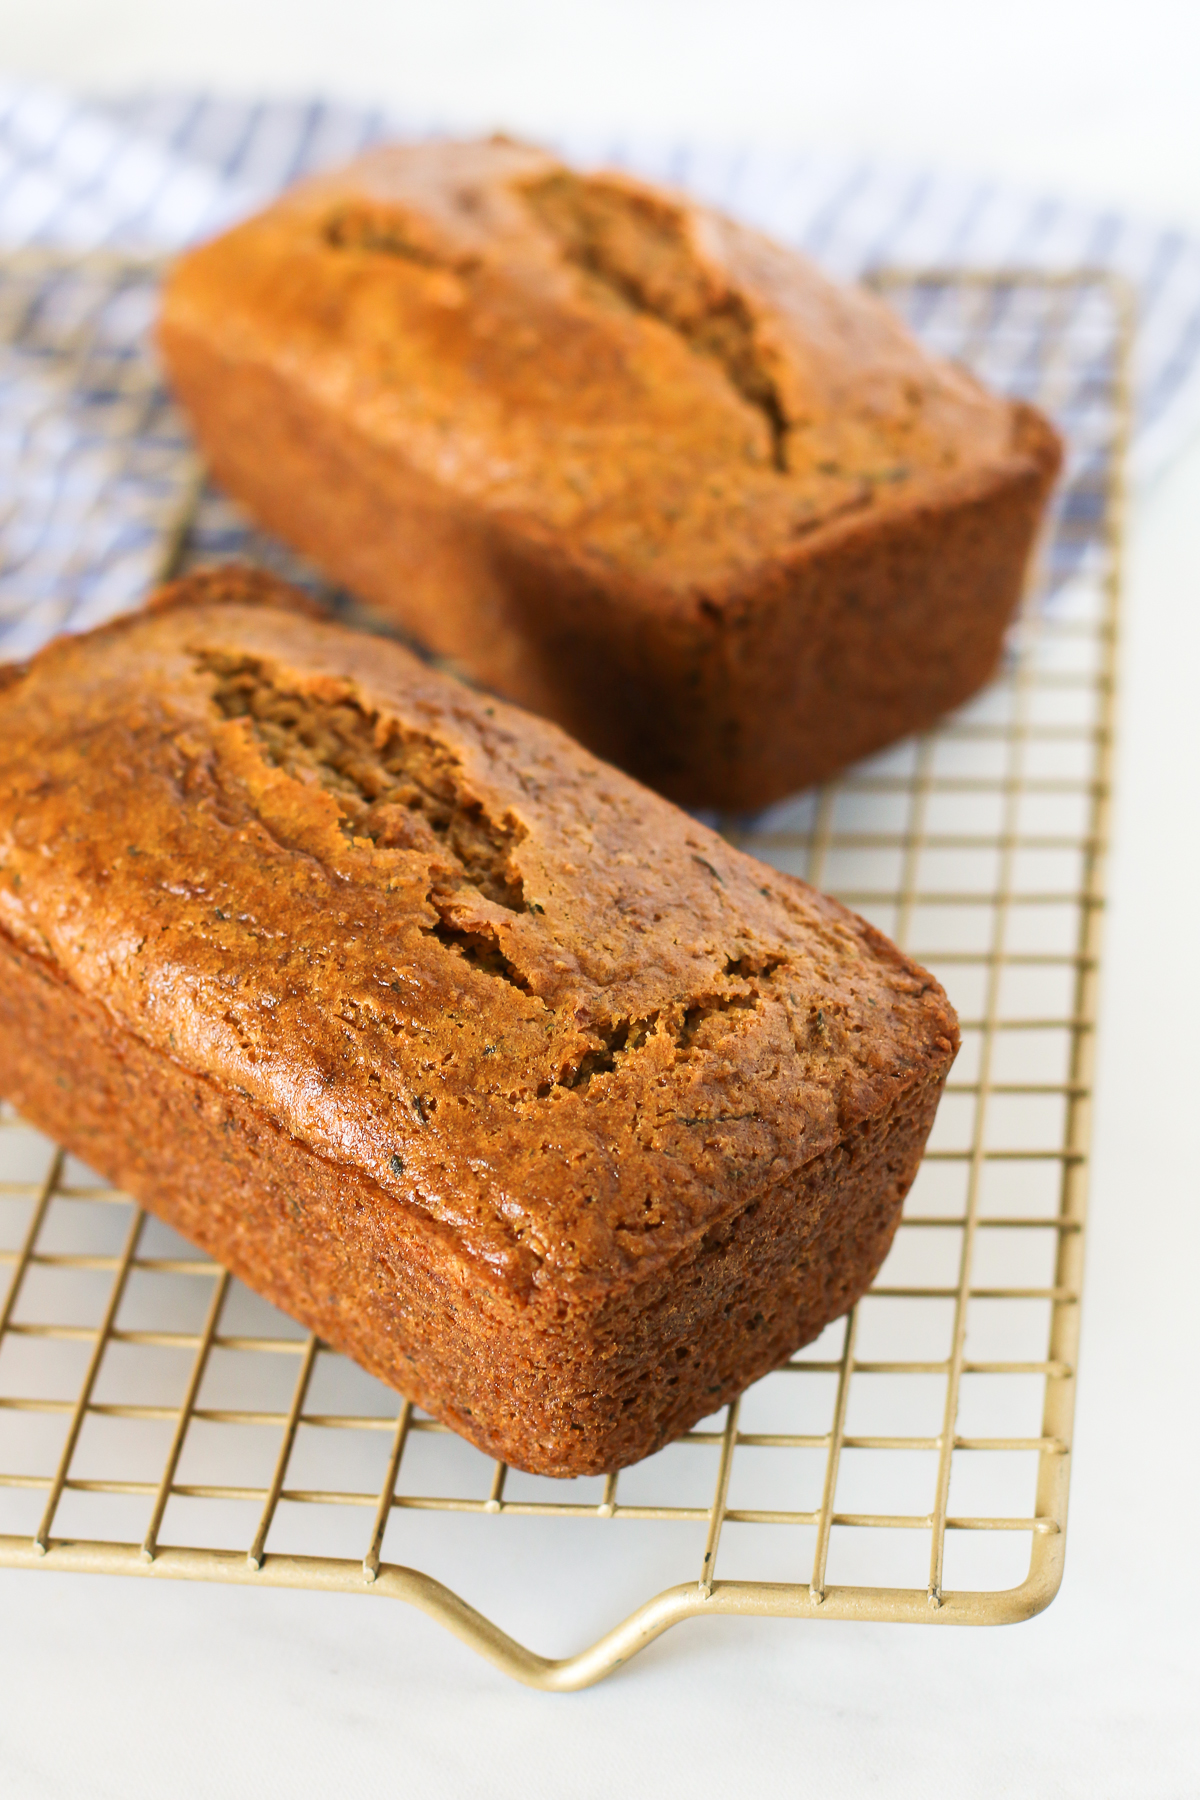 Gluten Free Vegan Zucchini Bread. Moist zucchini bread, with a touch of cinnamon and baked to perfection. 